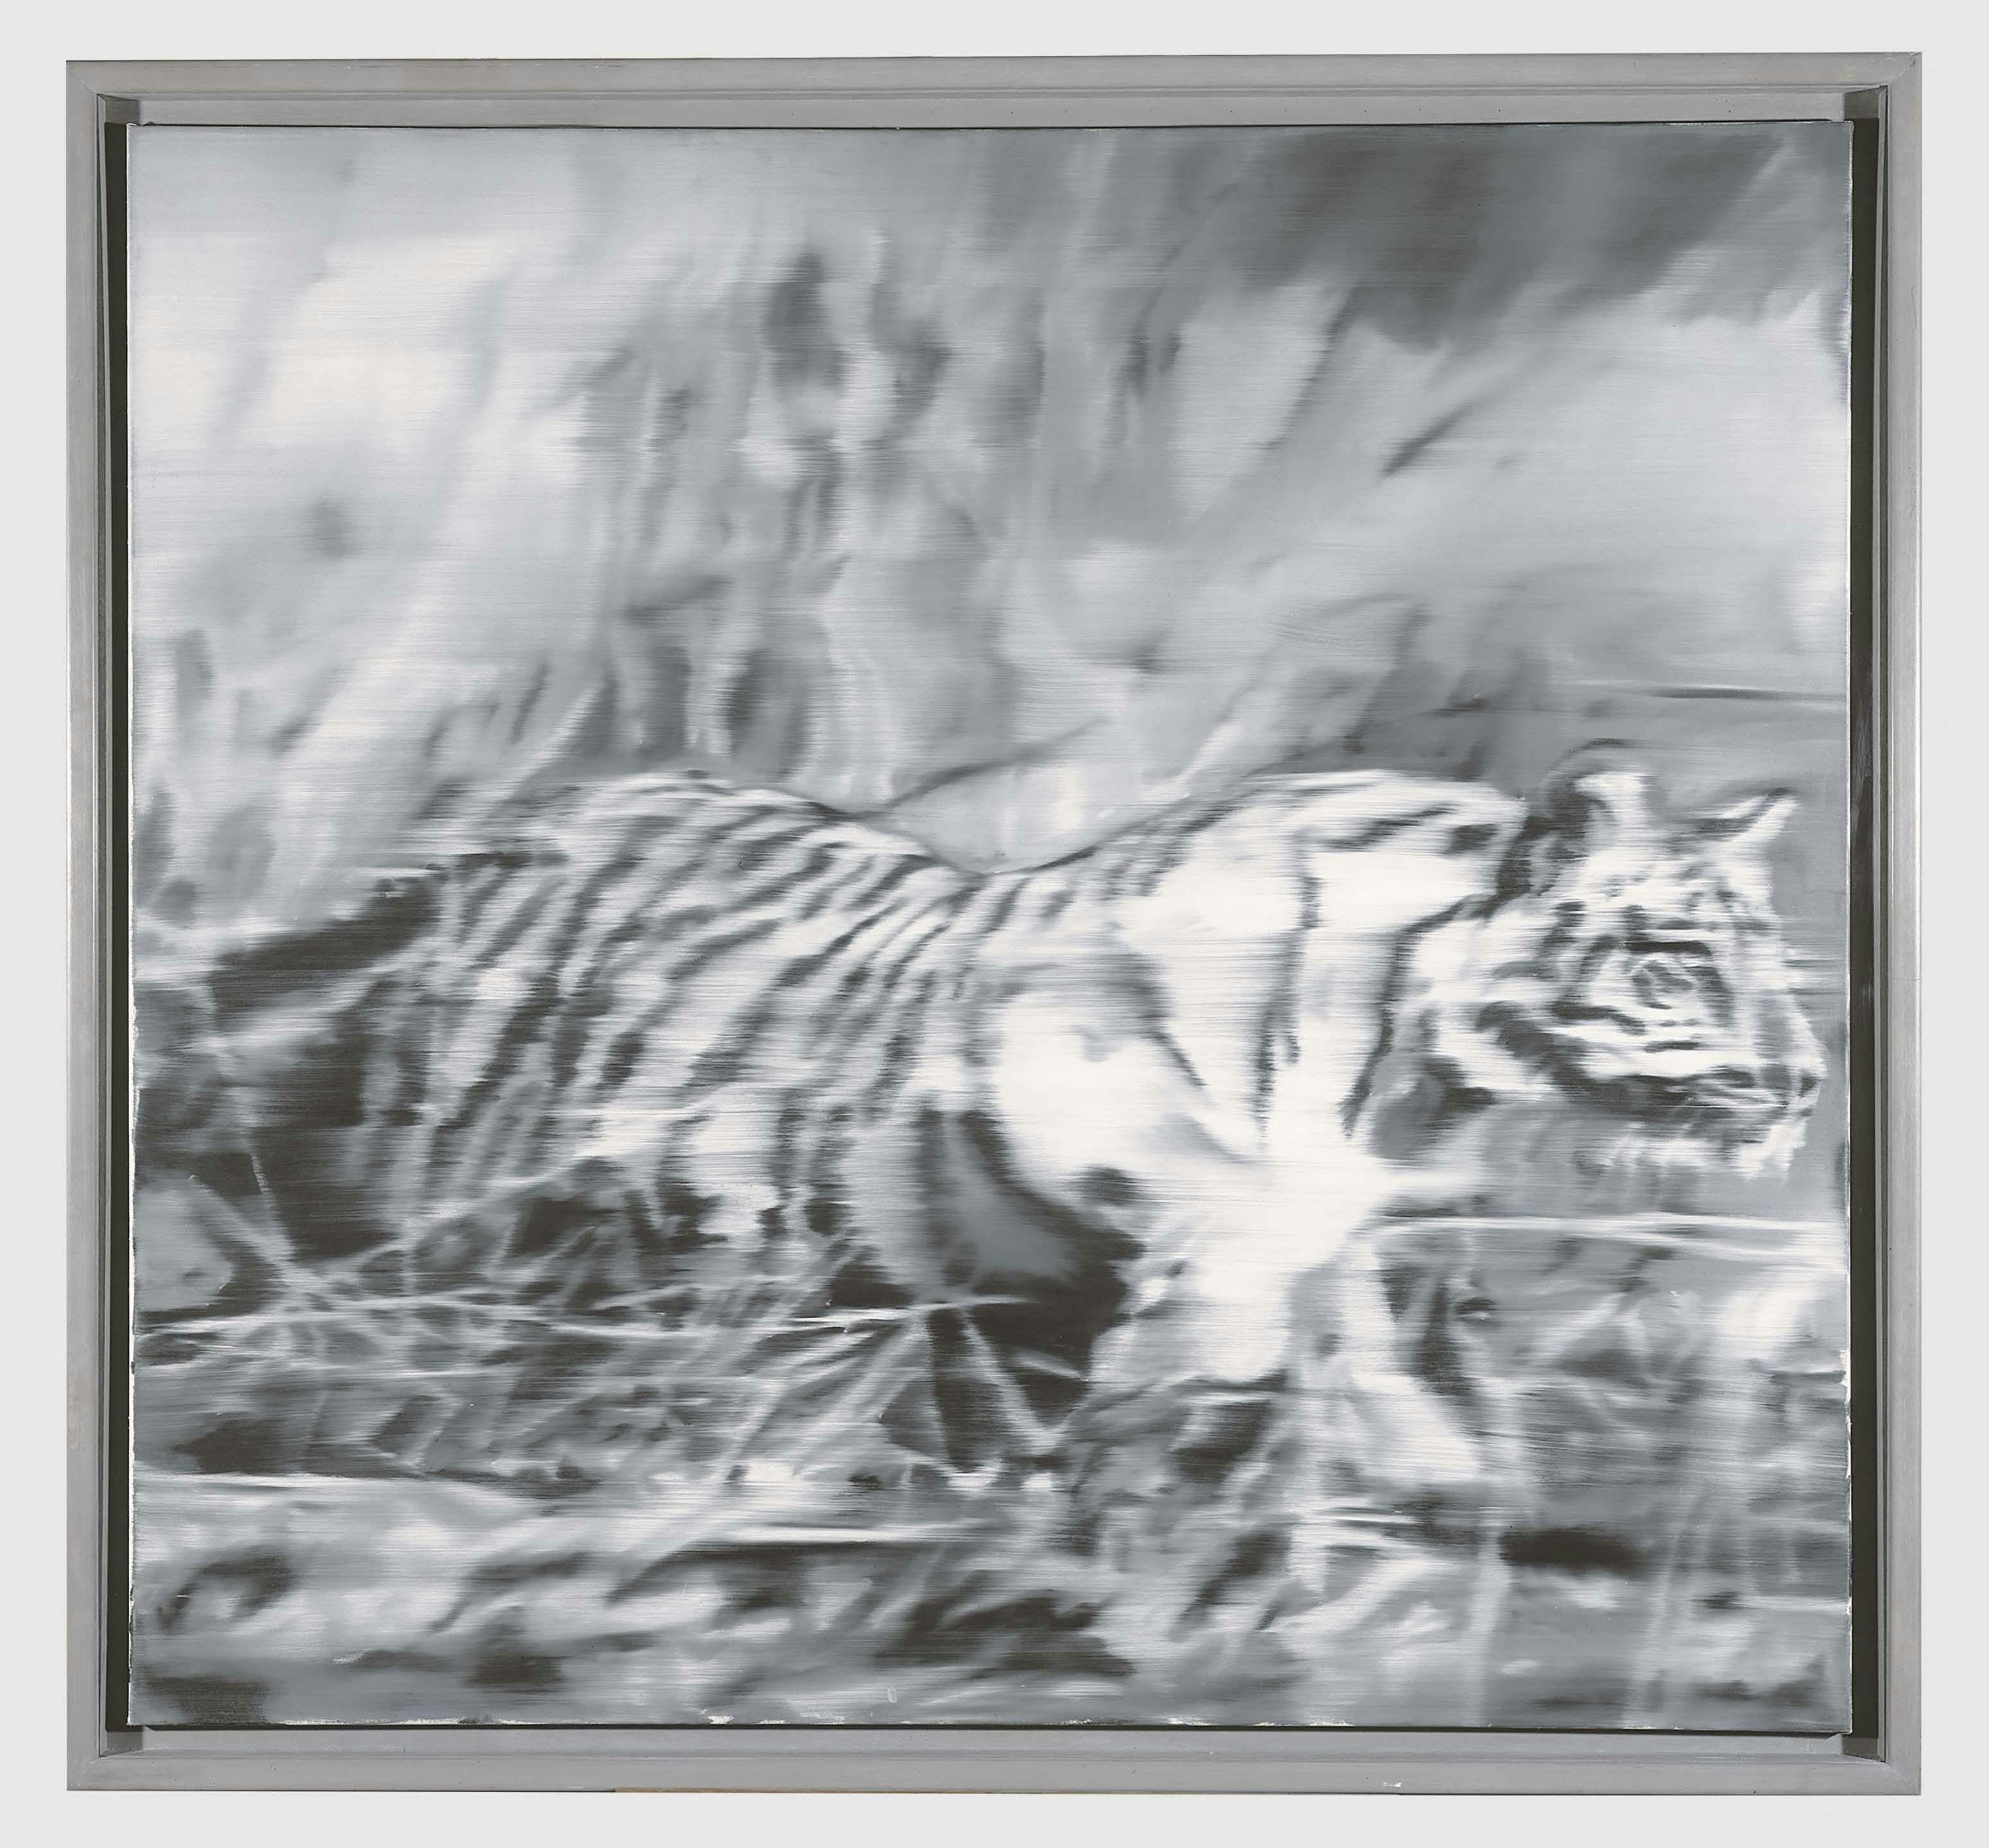 A painting by Gerhard Richter, titled Tiger, dated 1965.